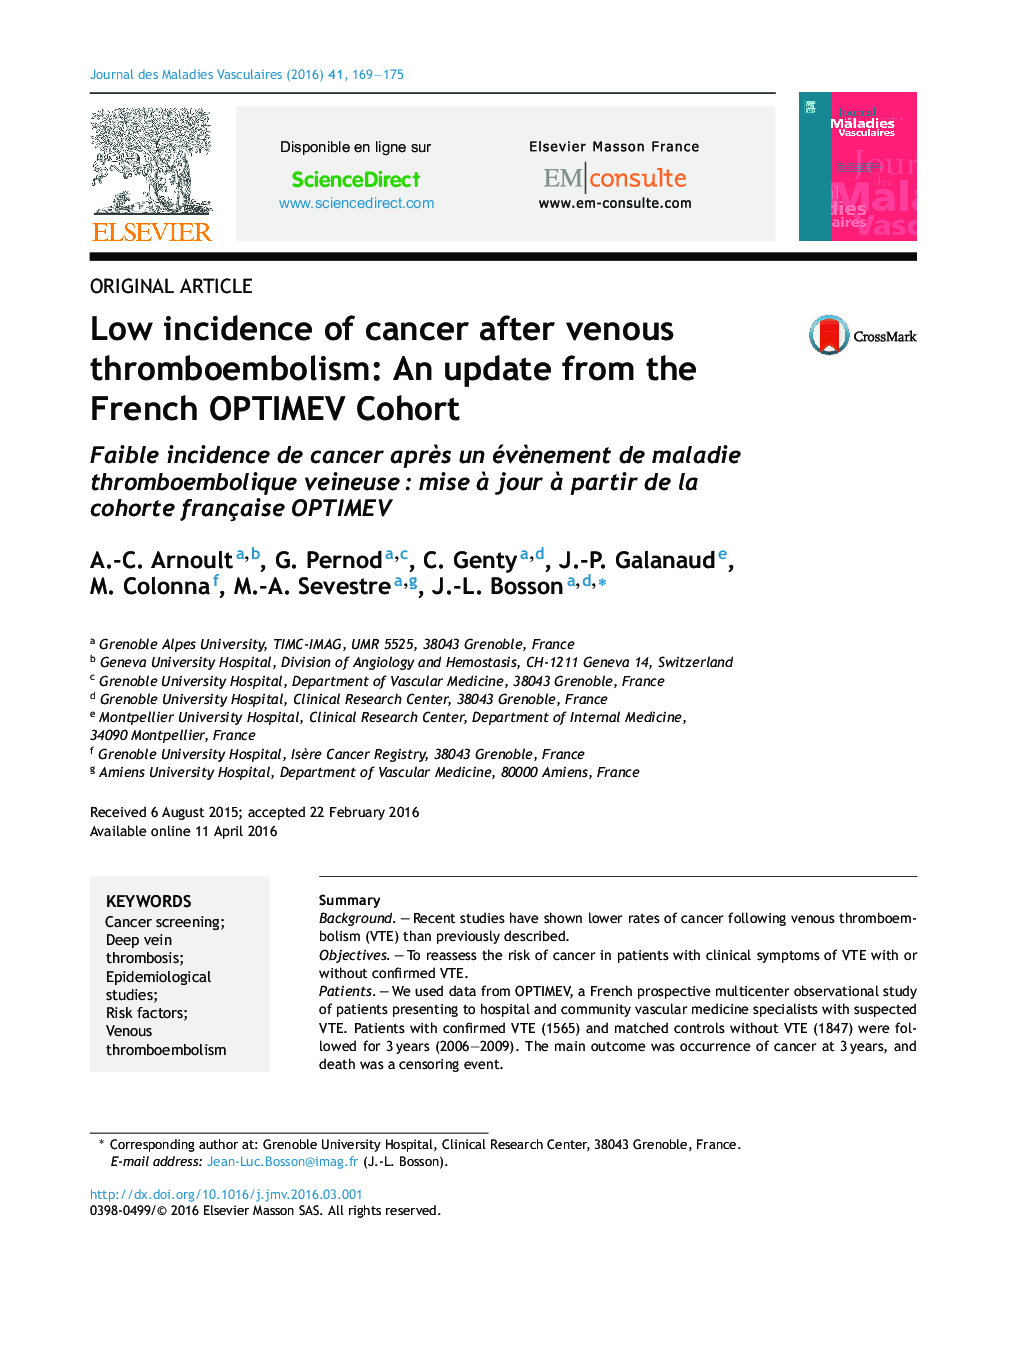 Low incidence of cancer after venous thromboembolism: An update from the French OPTIMEV Cohort